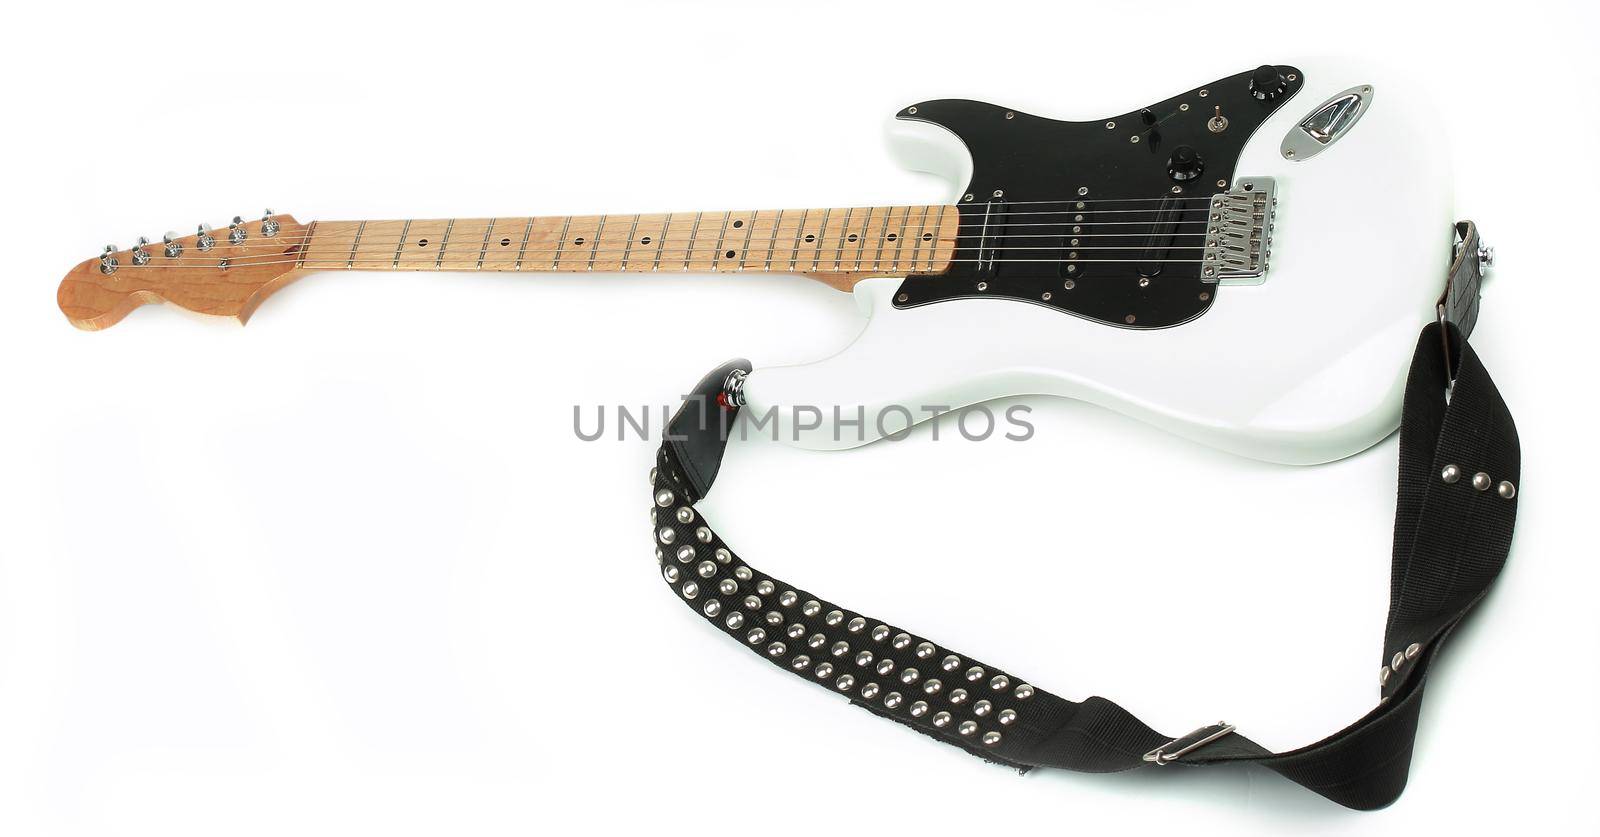 modern electric guitar on a white background.